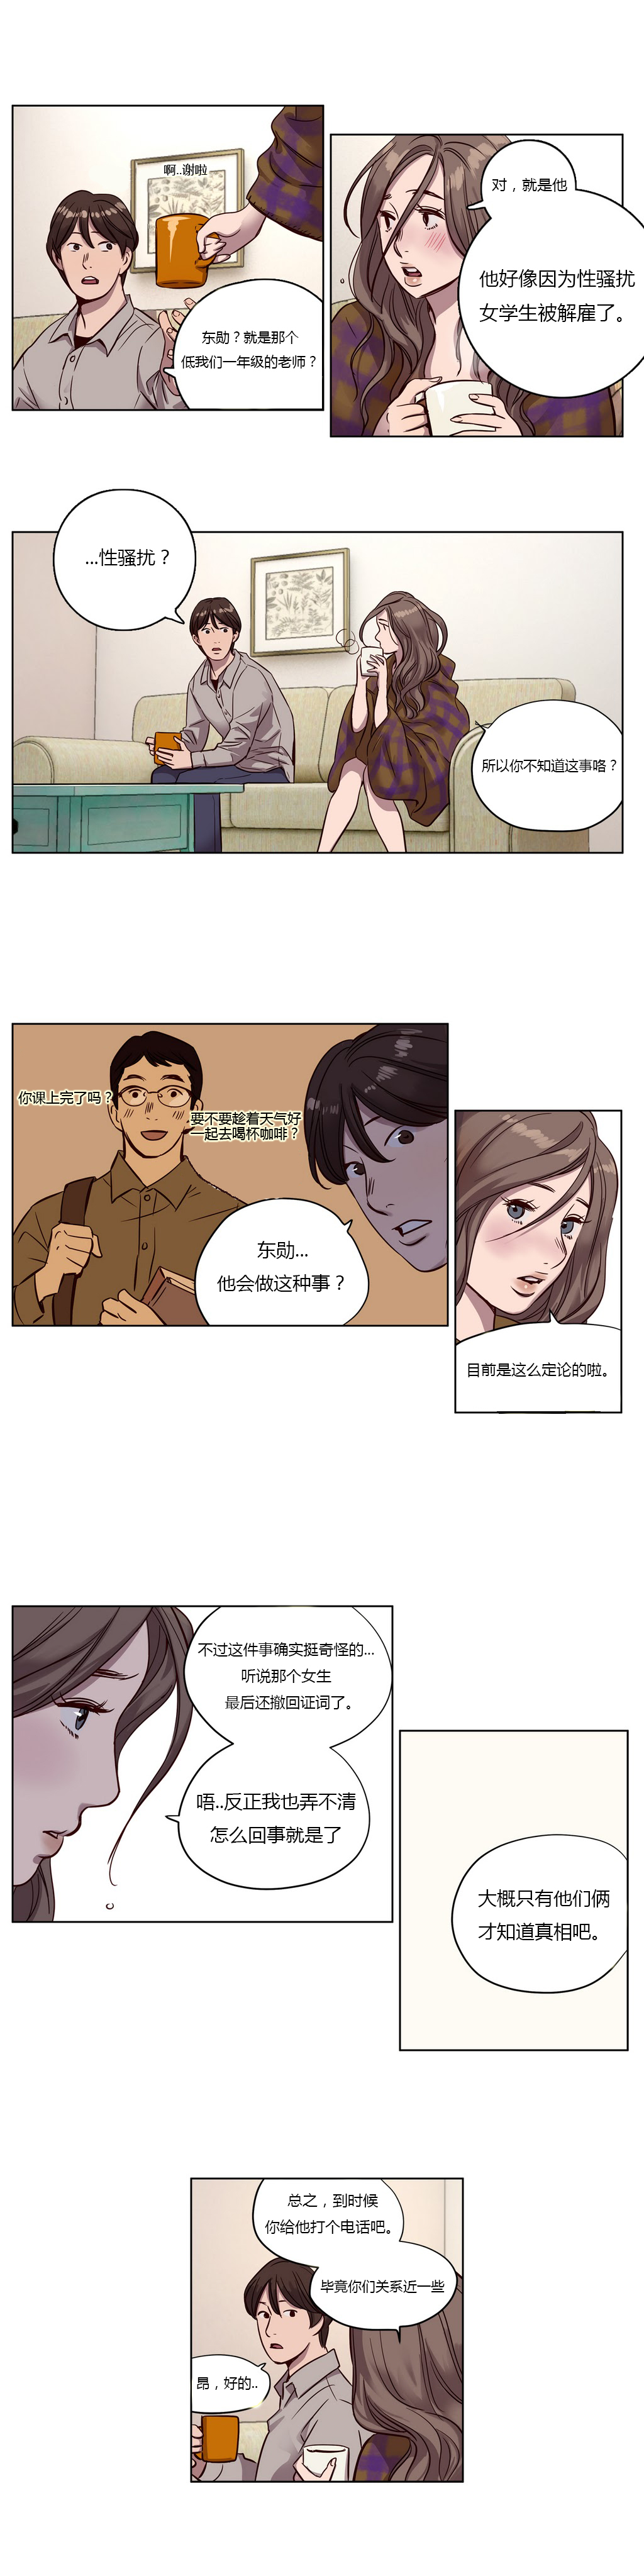 [Ramjak] Atonement Camp Ch.9-10 (Chinese) page 13 full